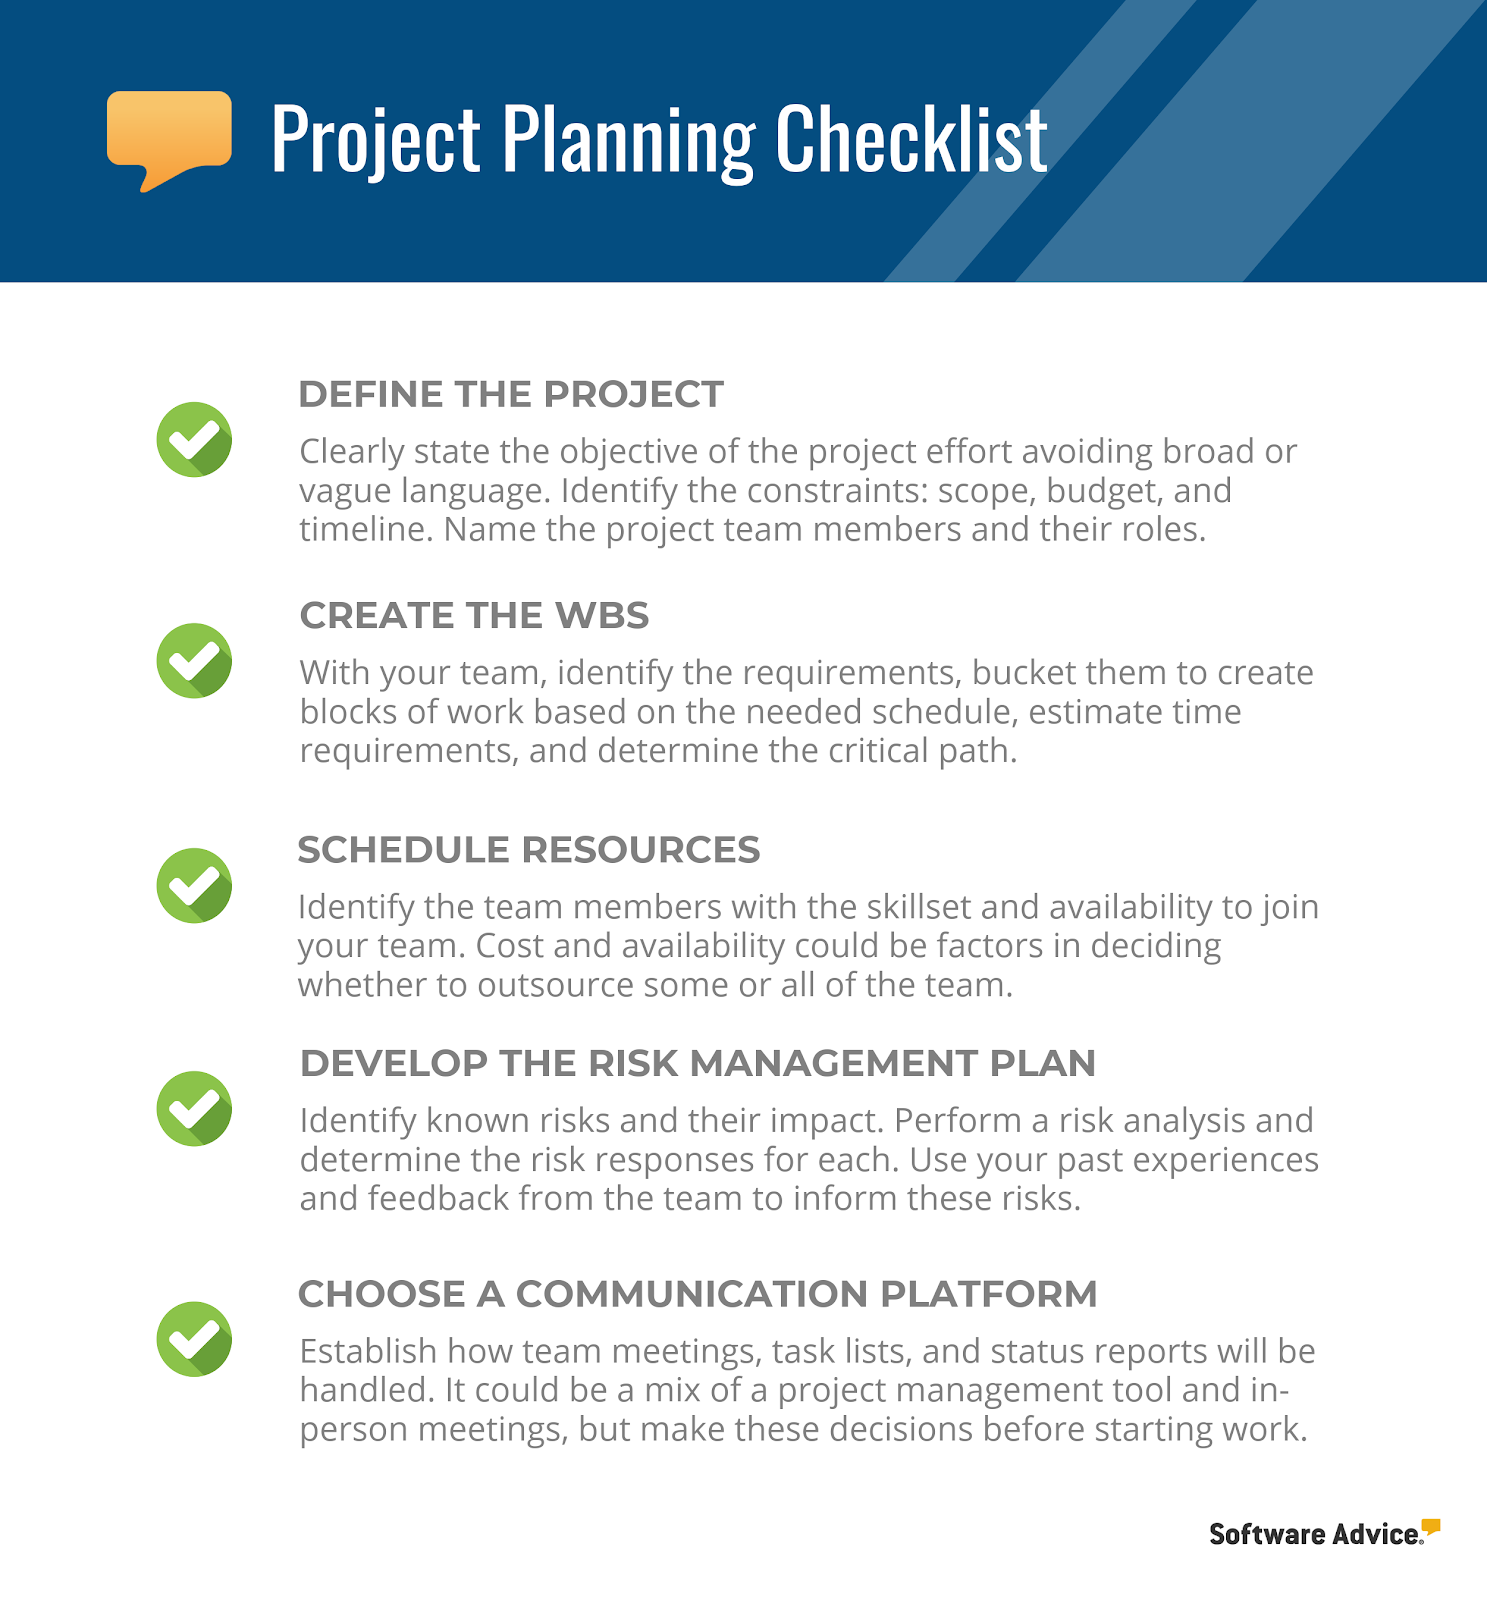 Project Planning Checklist: 11 Steps Any Project Should Follow  Intended For Project Planning Checklist Template Pertaining To Project Planning Checklist Template